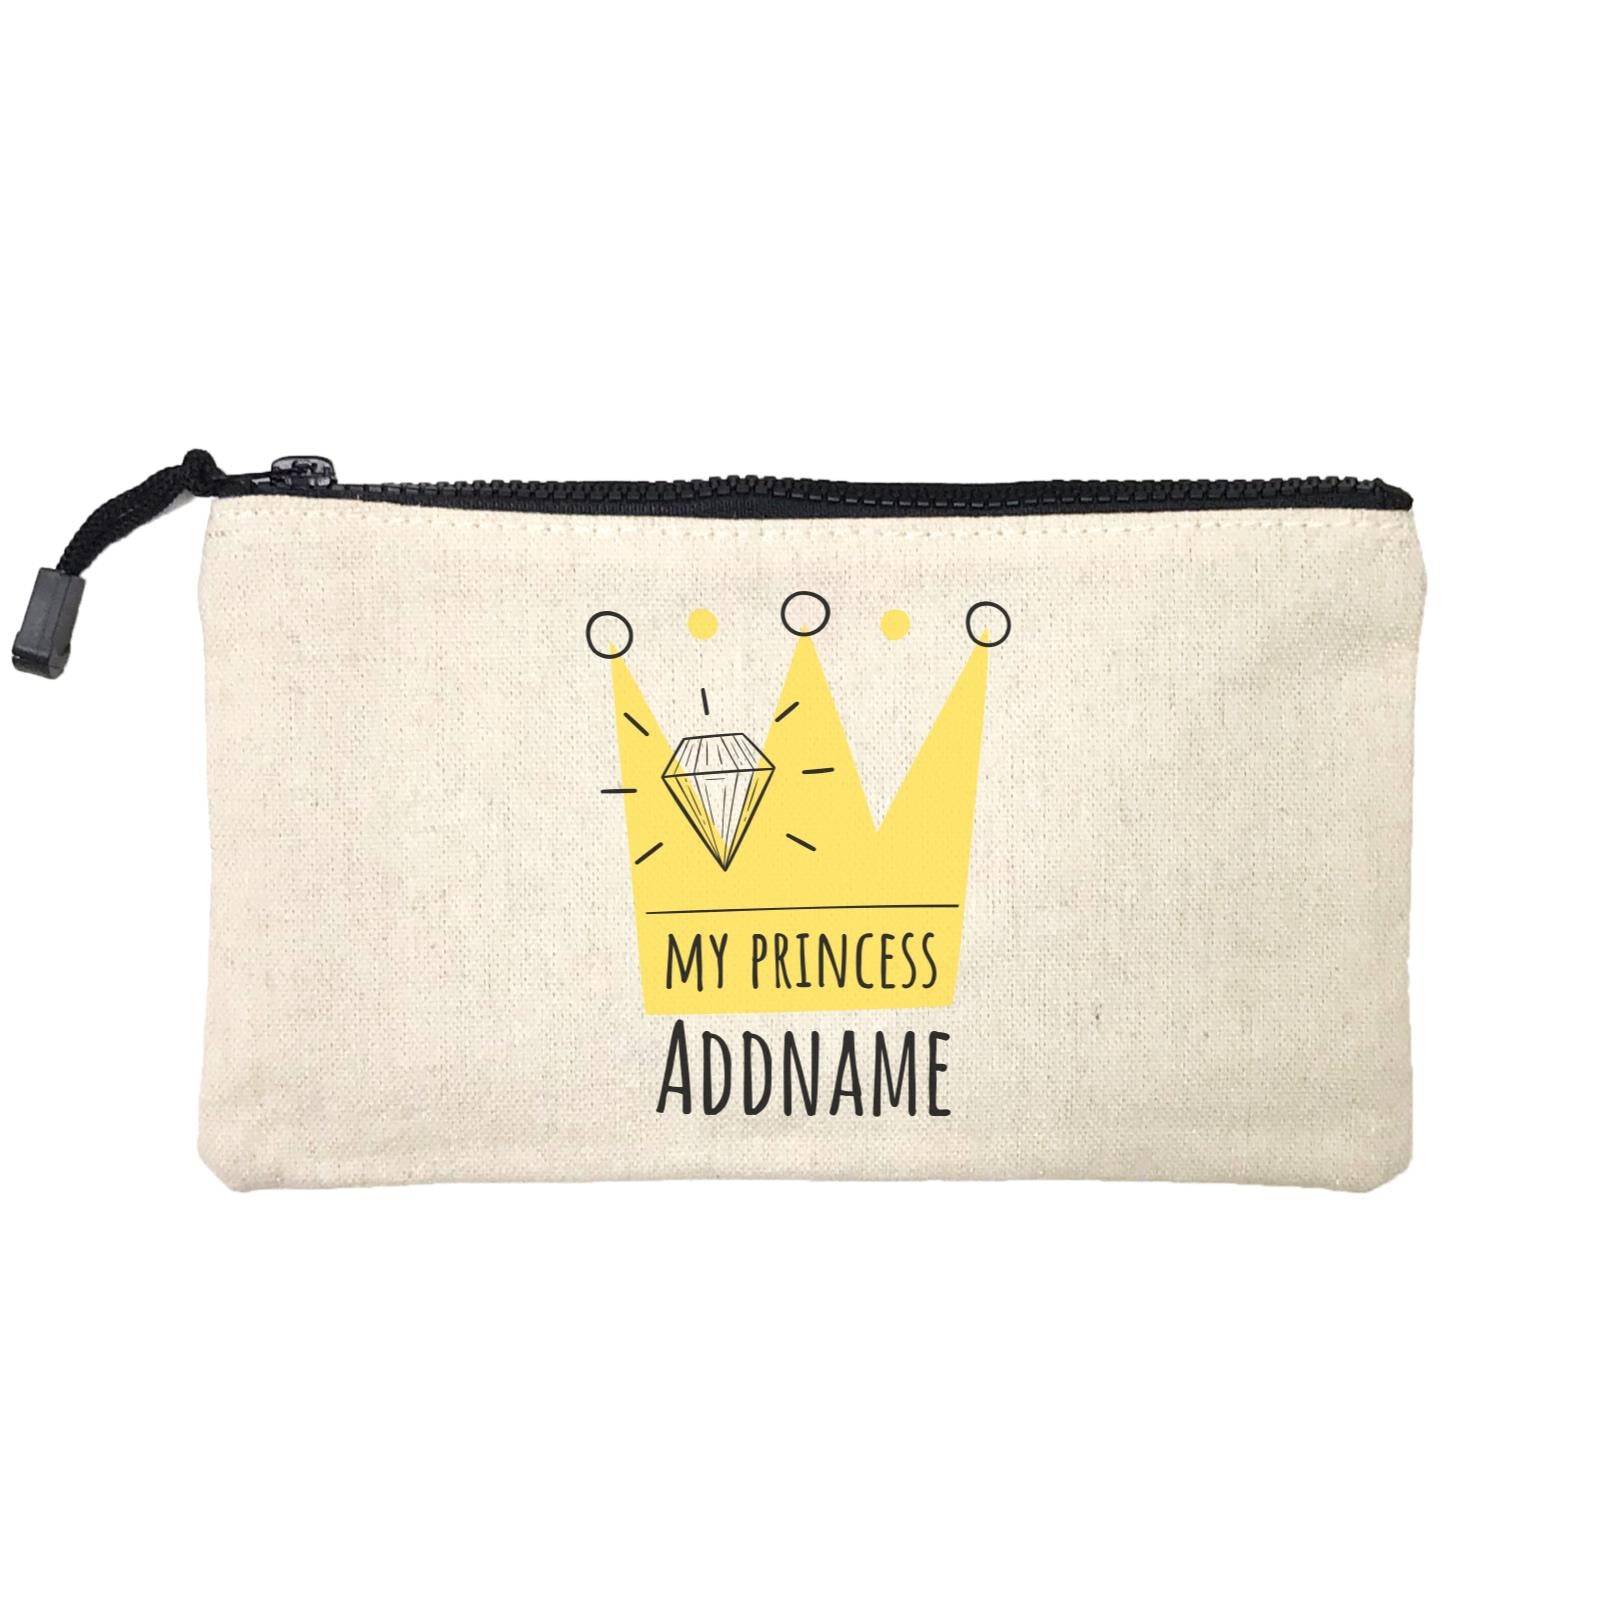 Drawn Crown My Princess Addname Mini Accessories Stationery Pouch